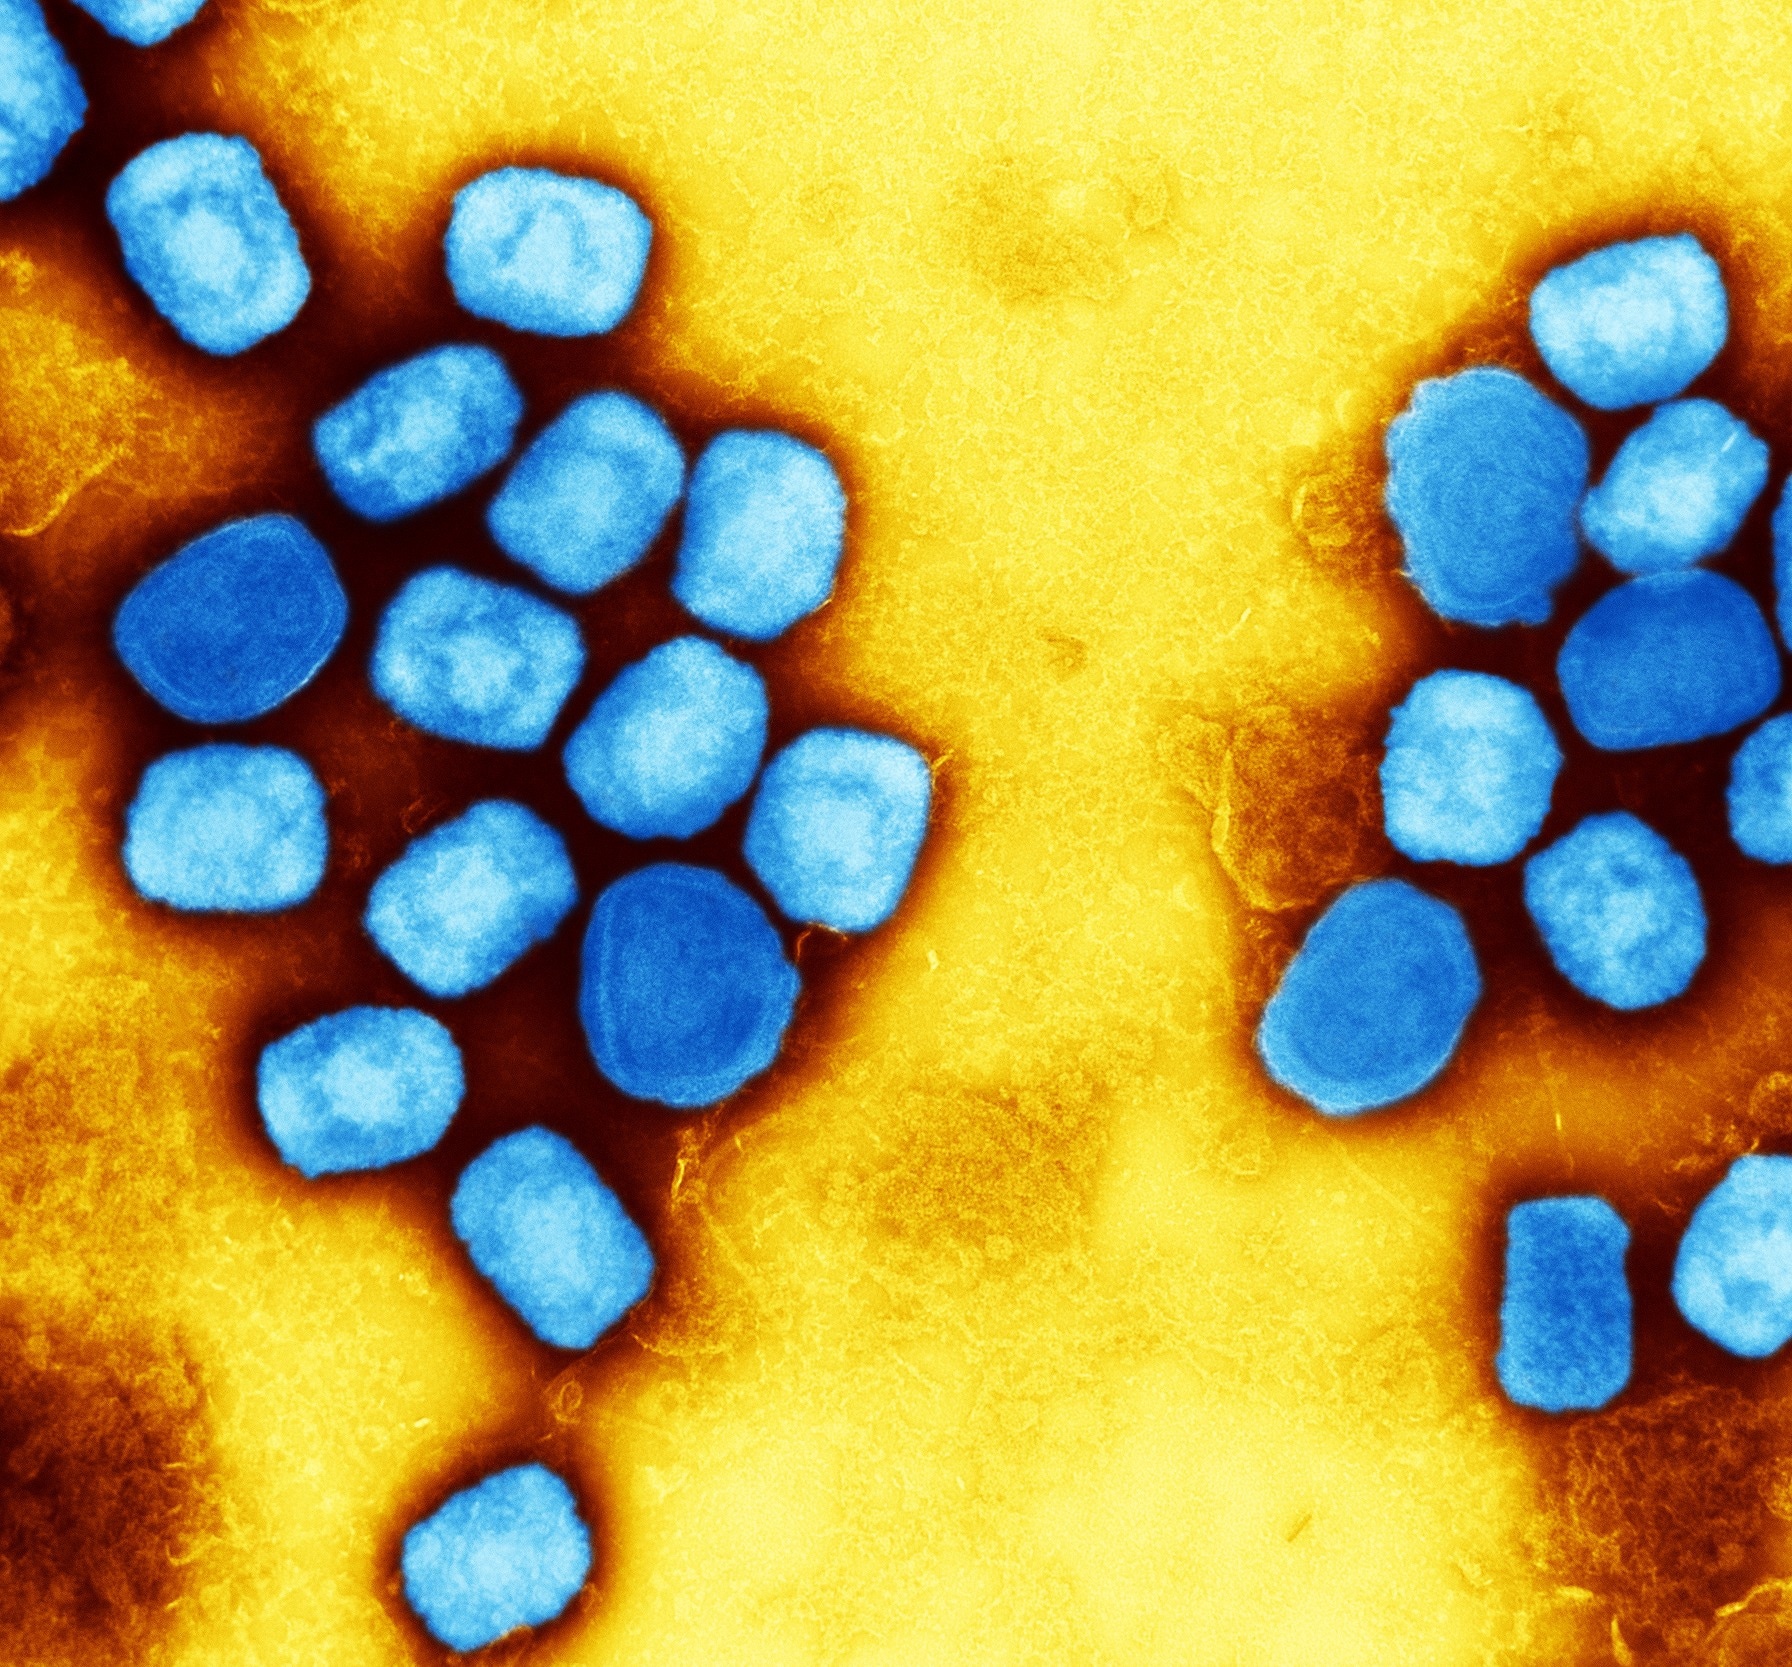 Colorized transmission electron micrograph of monkeypox virus particles (blue) cultivated and purified from cell culture. Image captured at the NIAID Integrated Research Facility (IRF) in Fort Detrick, Maryland. Image Credit: NIAID